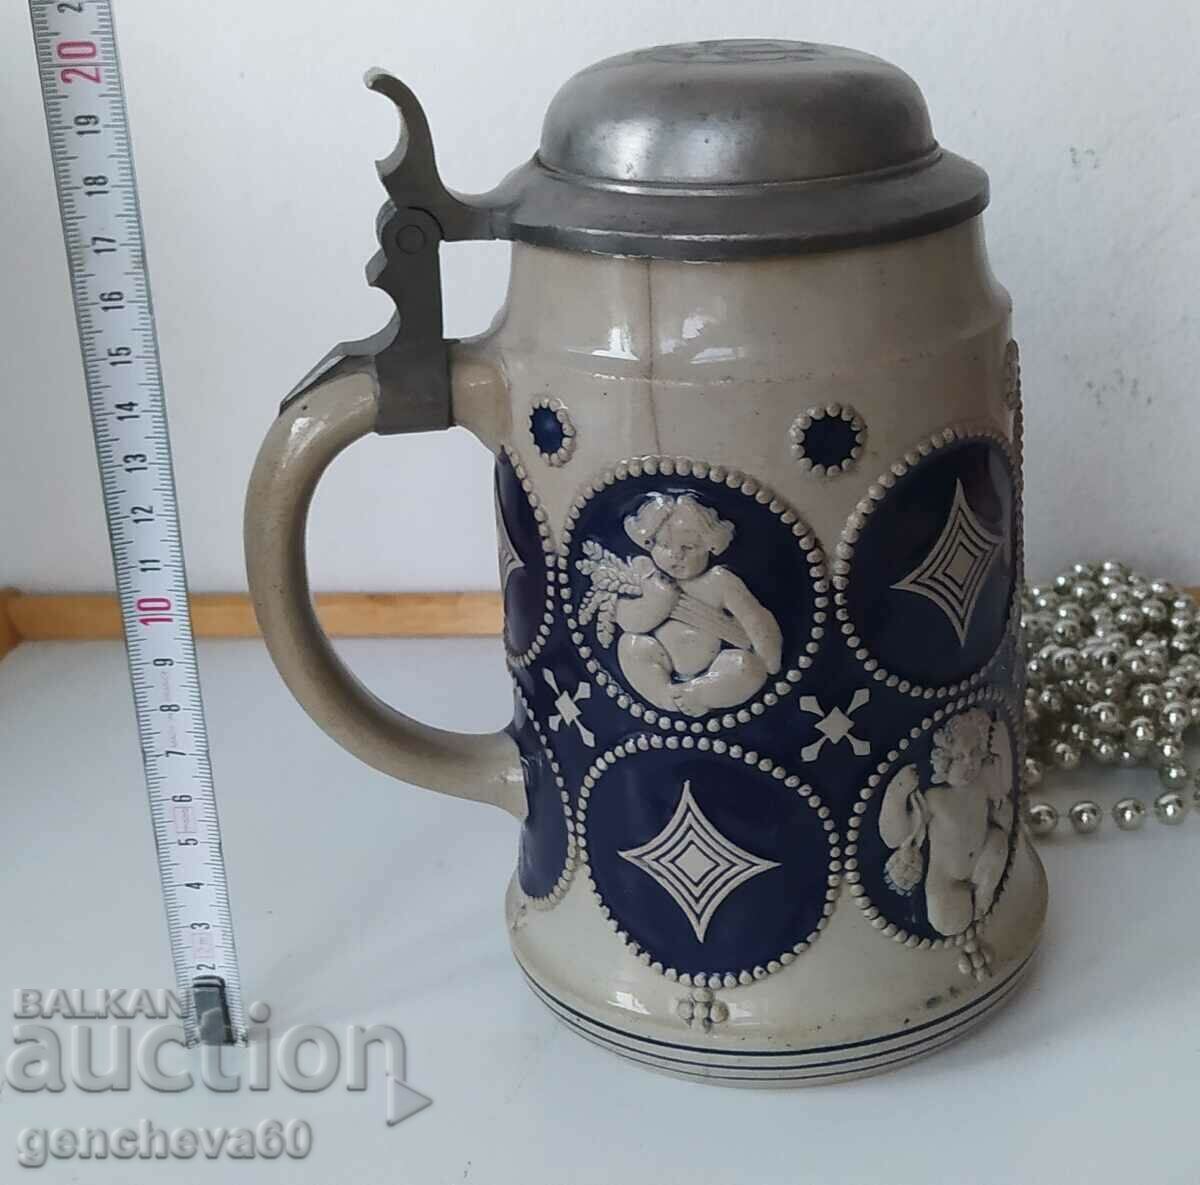 Collectible beer mug 1 liter with initials, markings